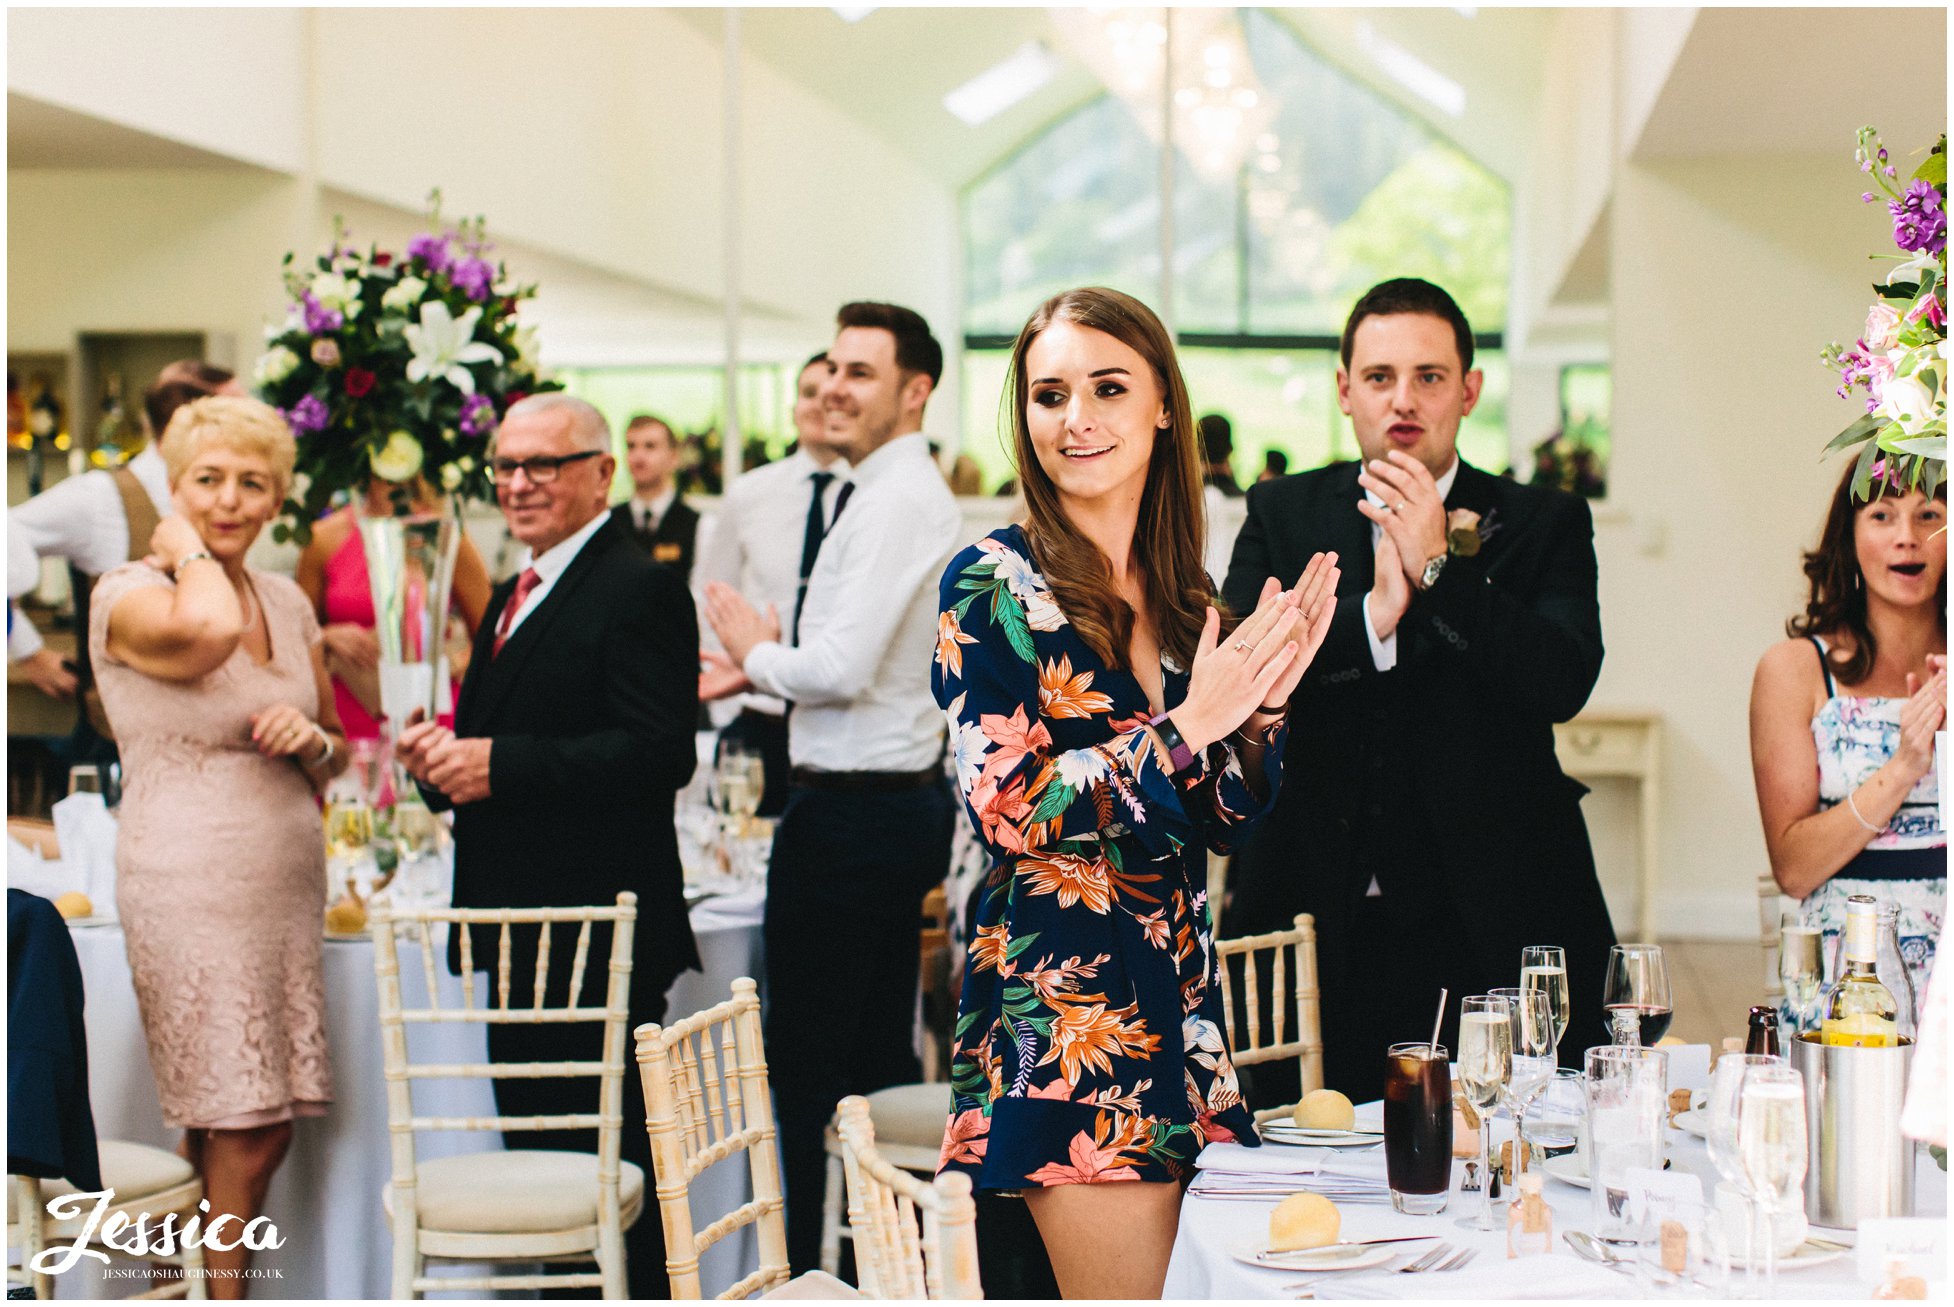 wedding guests clapping as the couple enter